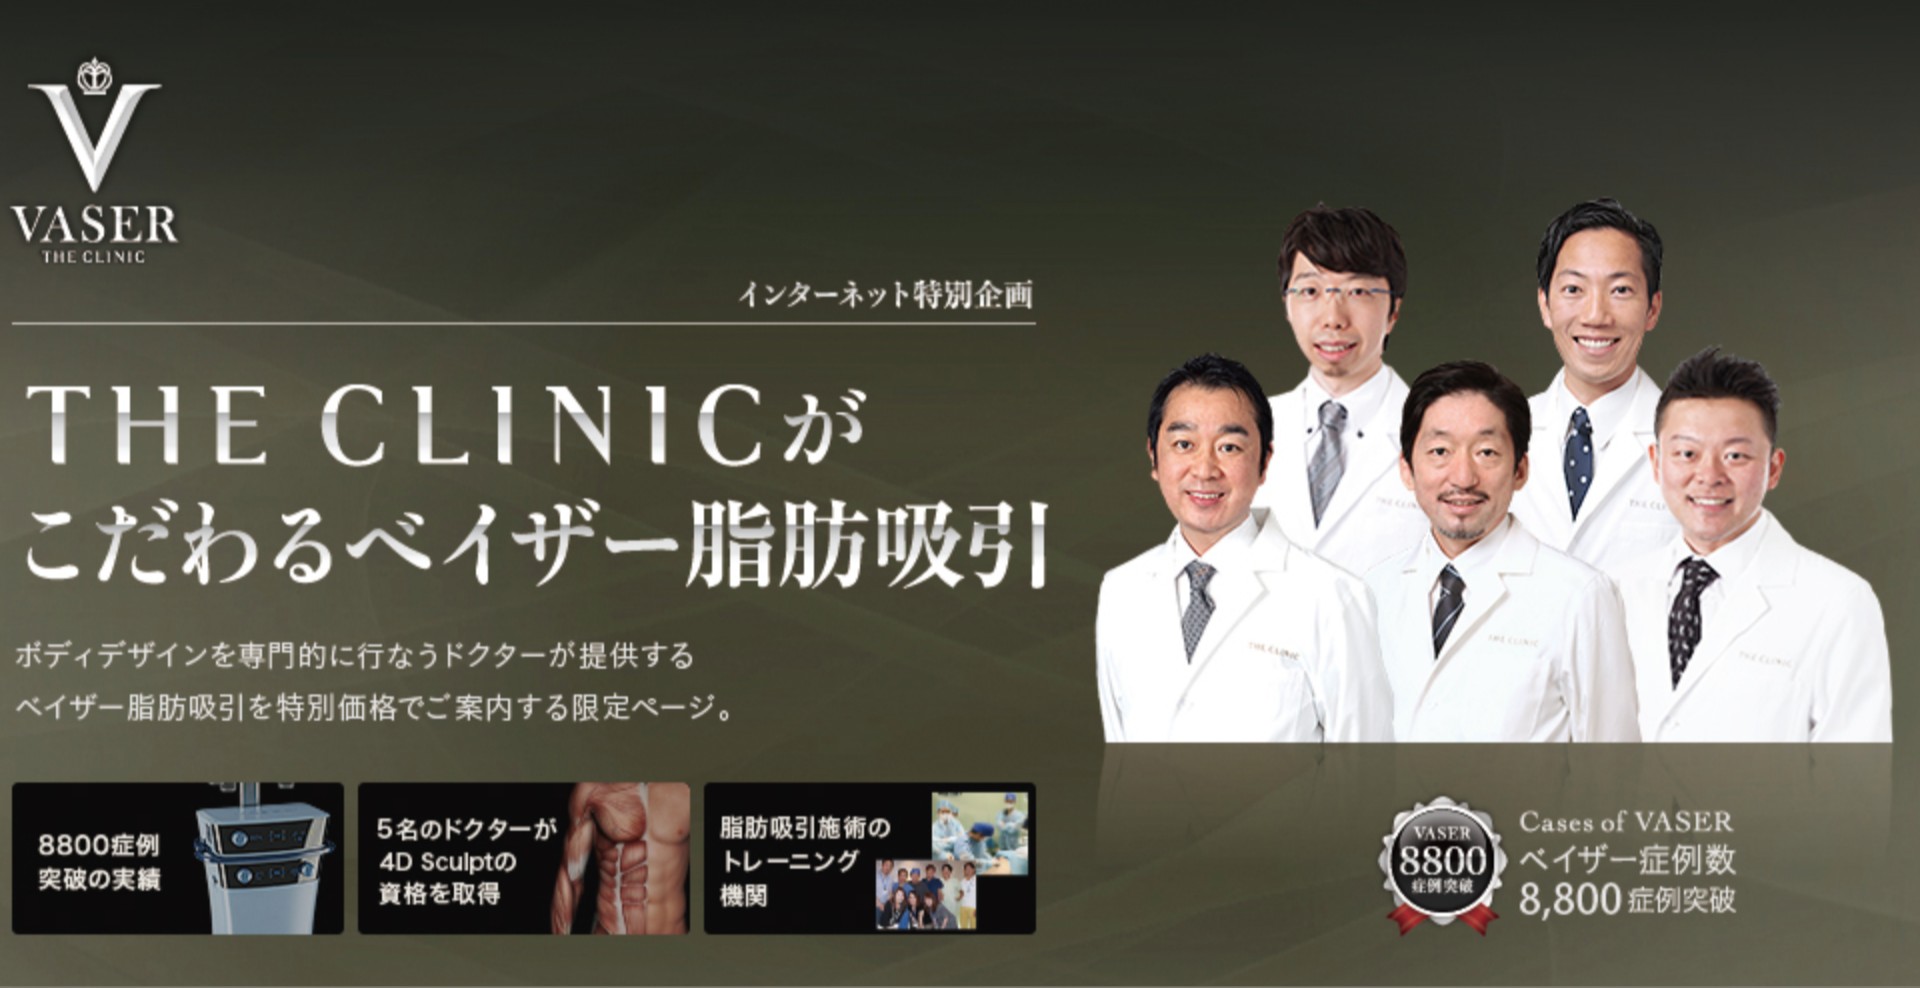 The CLINIC